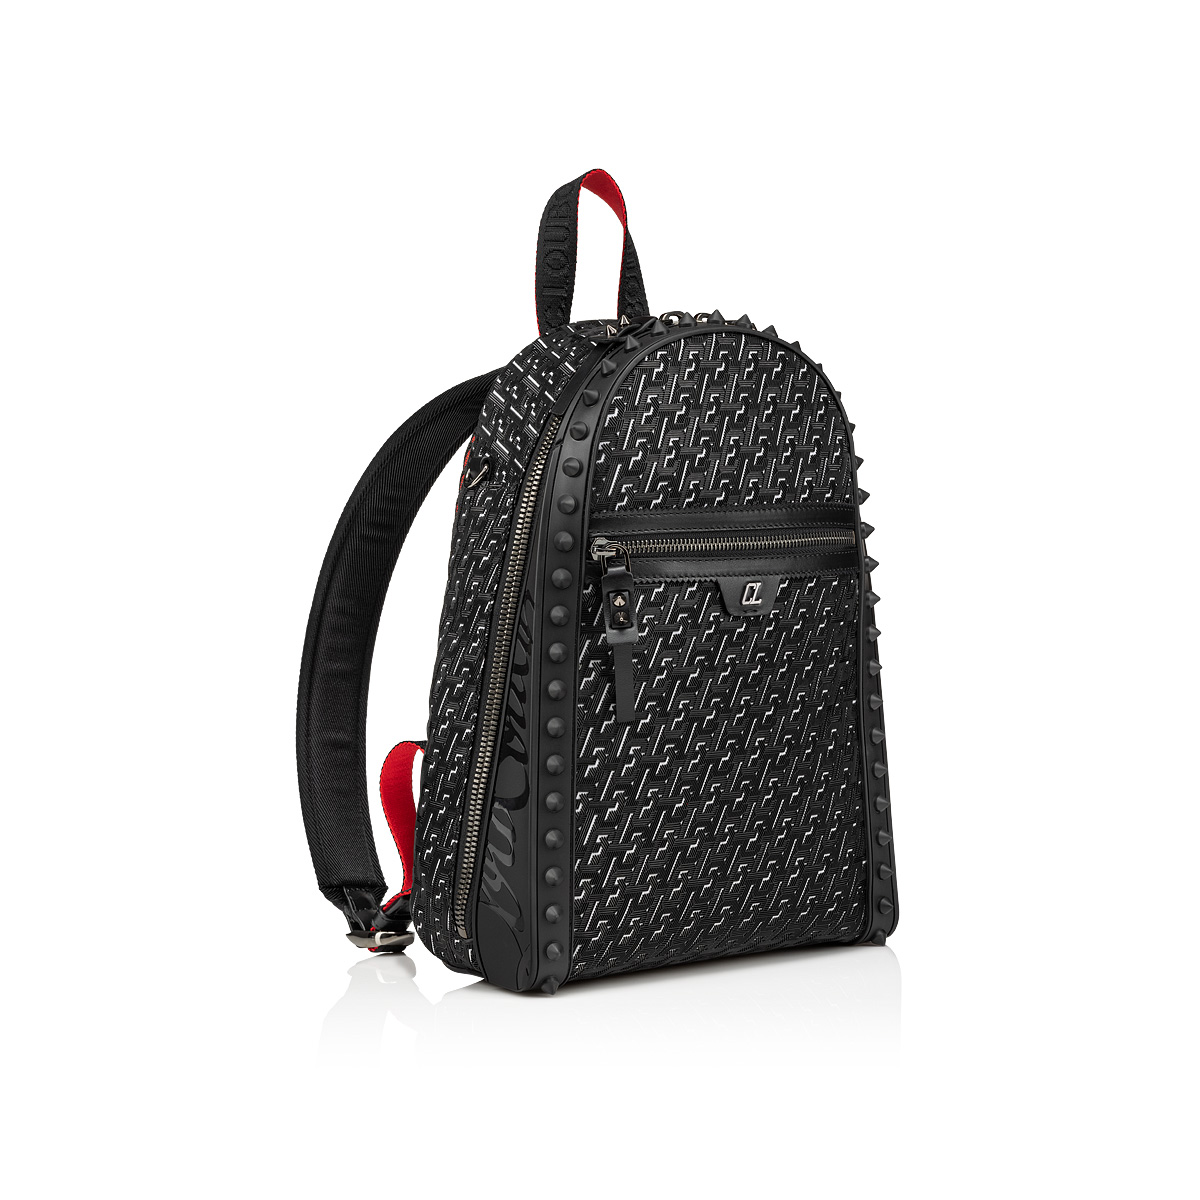 Loubitown - Messenger bag - Coated canva Techno CL and rubber - Black -  Christian Louboutin